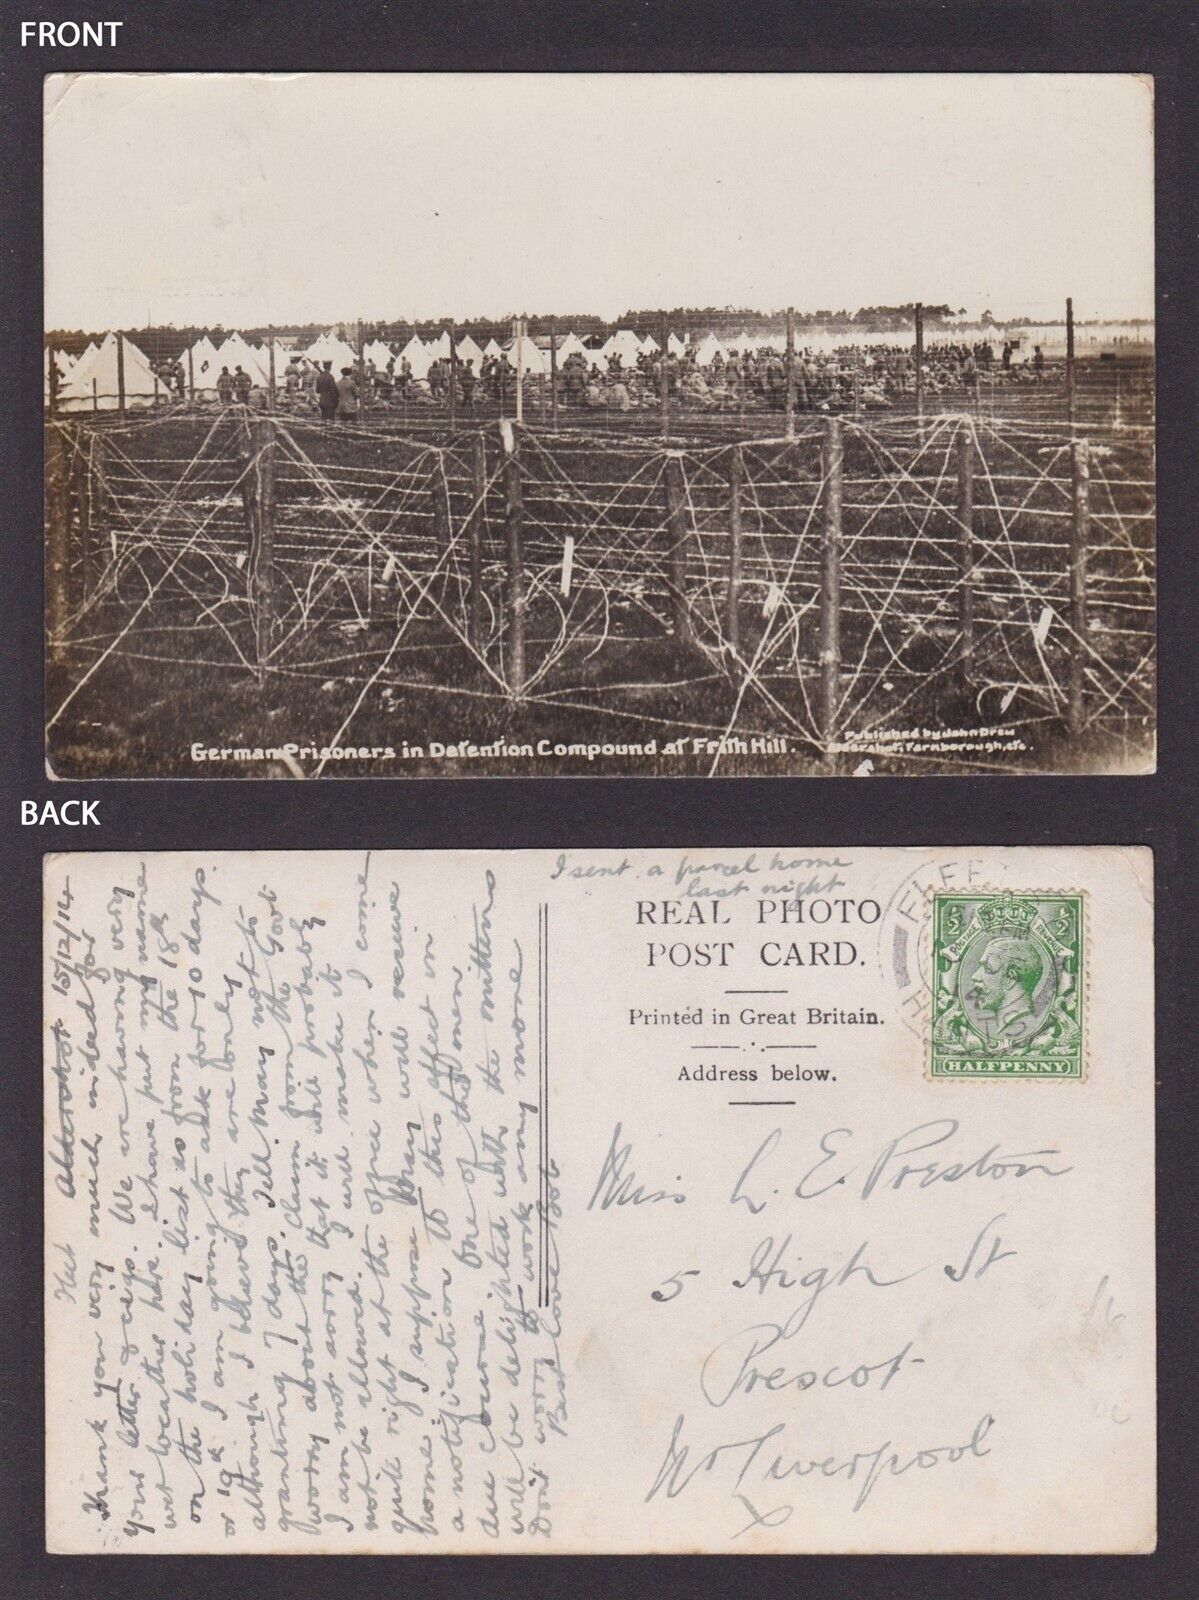 GREAT BRITAIN, Vintage postcard, German Prisoners in Frith Hill, WWI